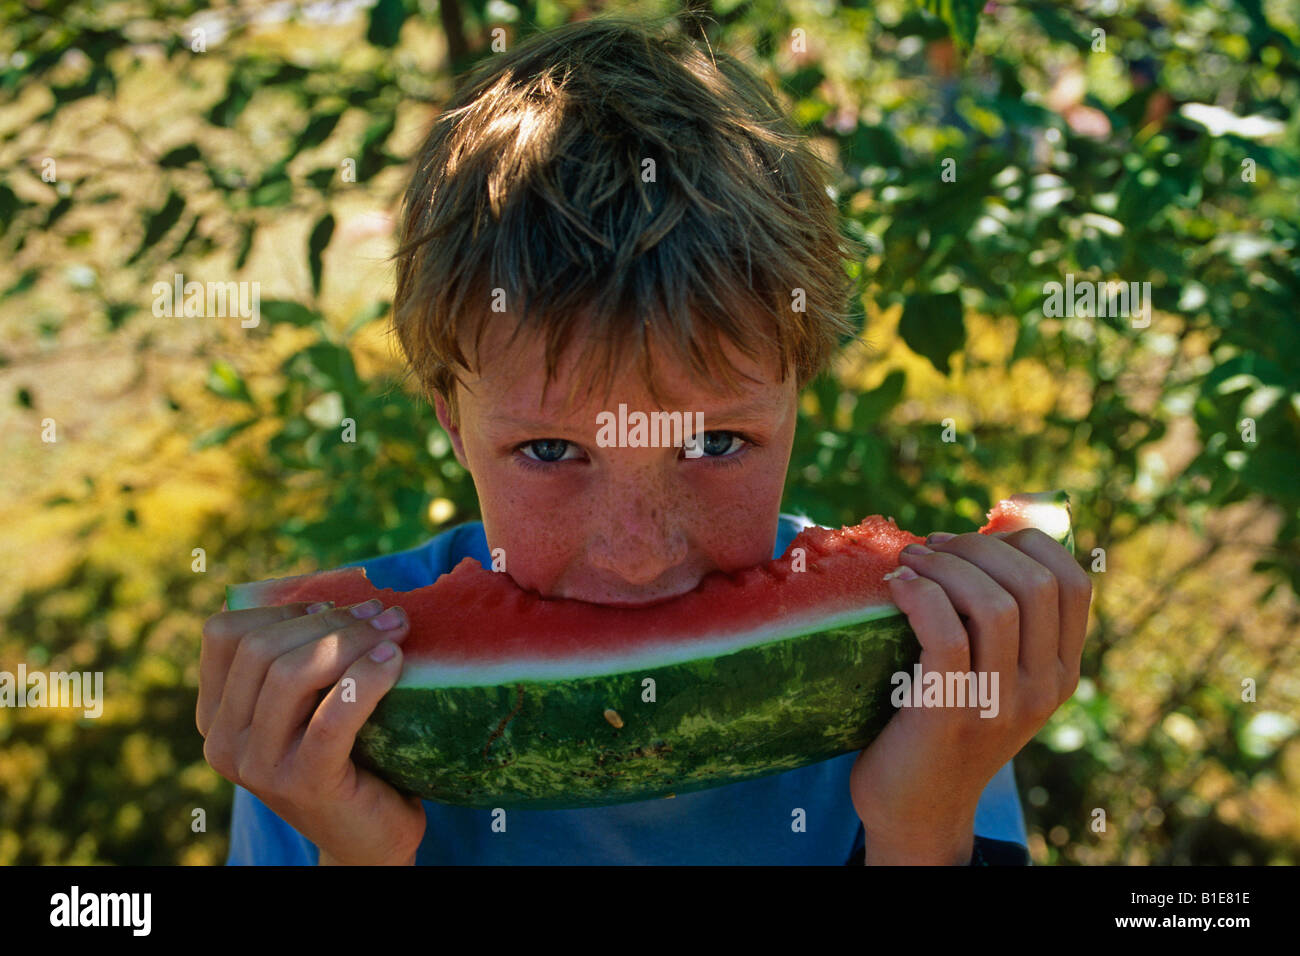 Young boy biting into juicy watermelon USA Stock Photo